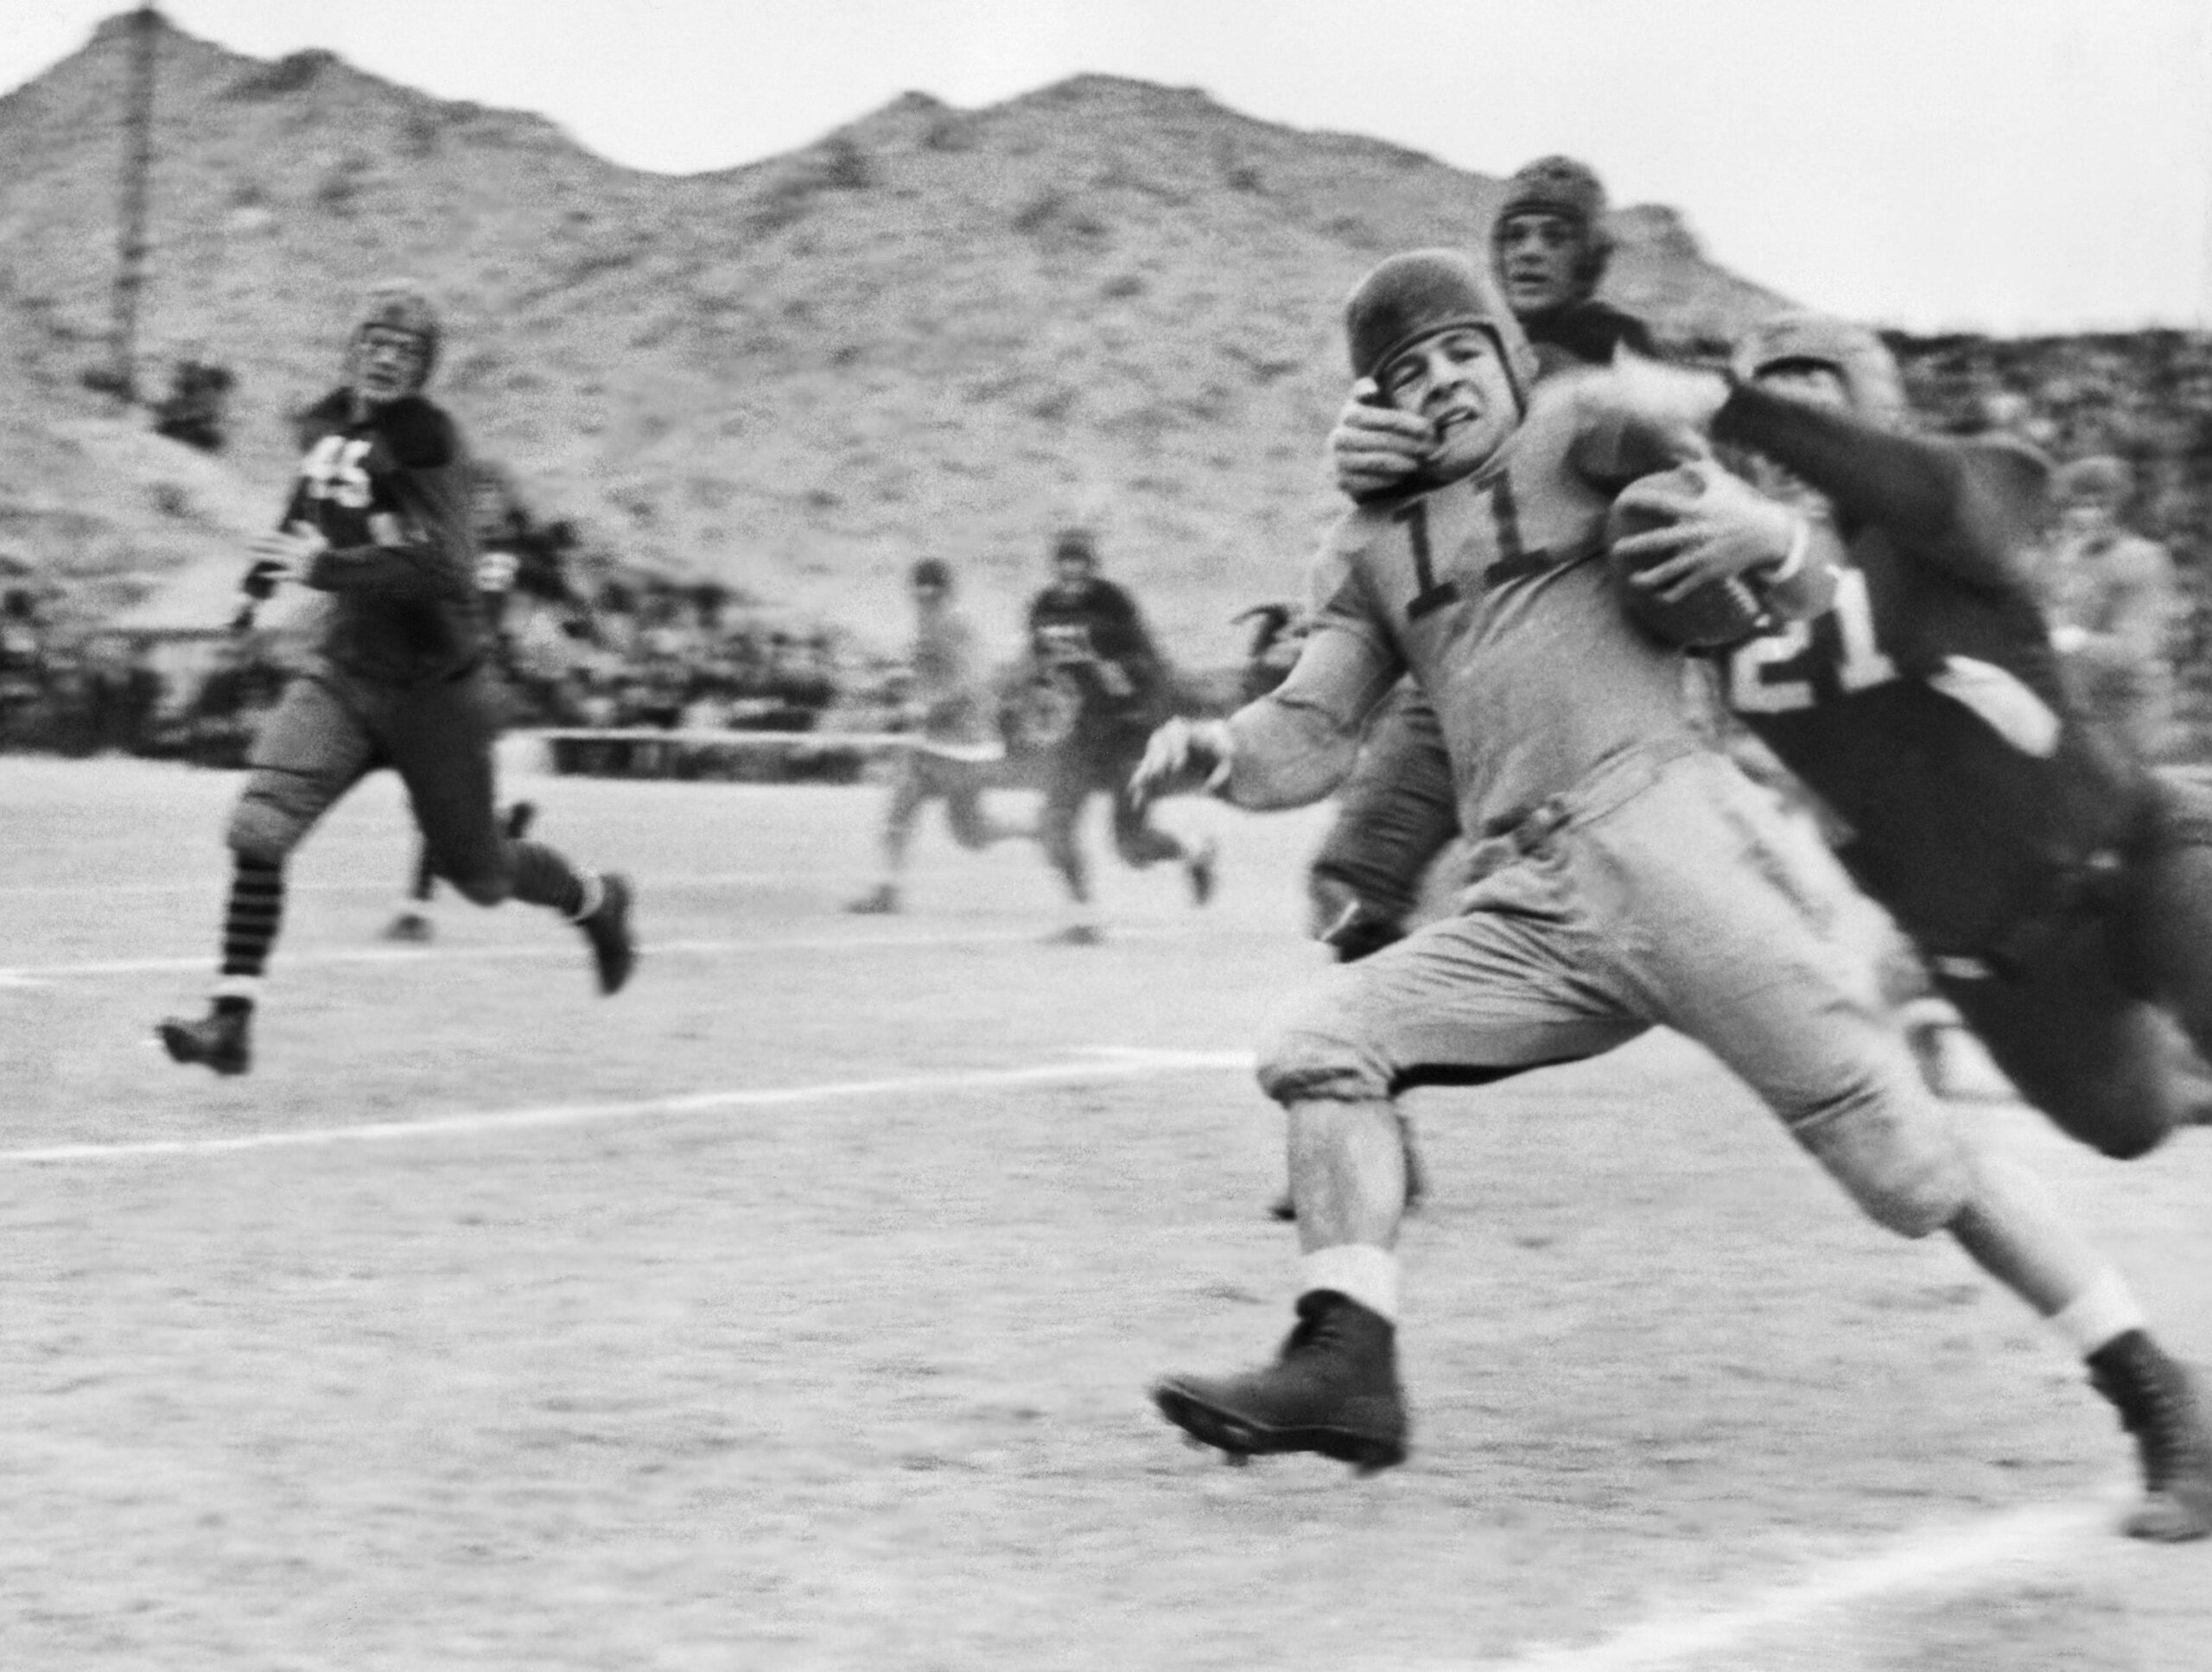 This photo, from the close of the first season of the AP poll, shows Texas Tech's famed Elmer Tarbox, No. 21, at extreme right, giving the well-known neck tie tackle at the Sun Bowl in El Paso, Texas, on Jan. 2, 1937. (AP Photo) 